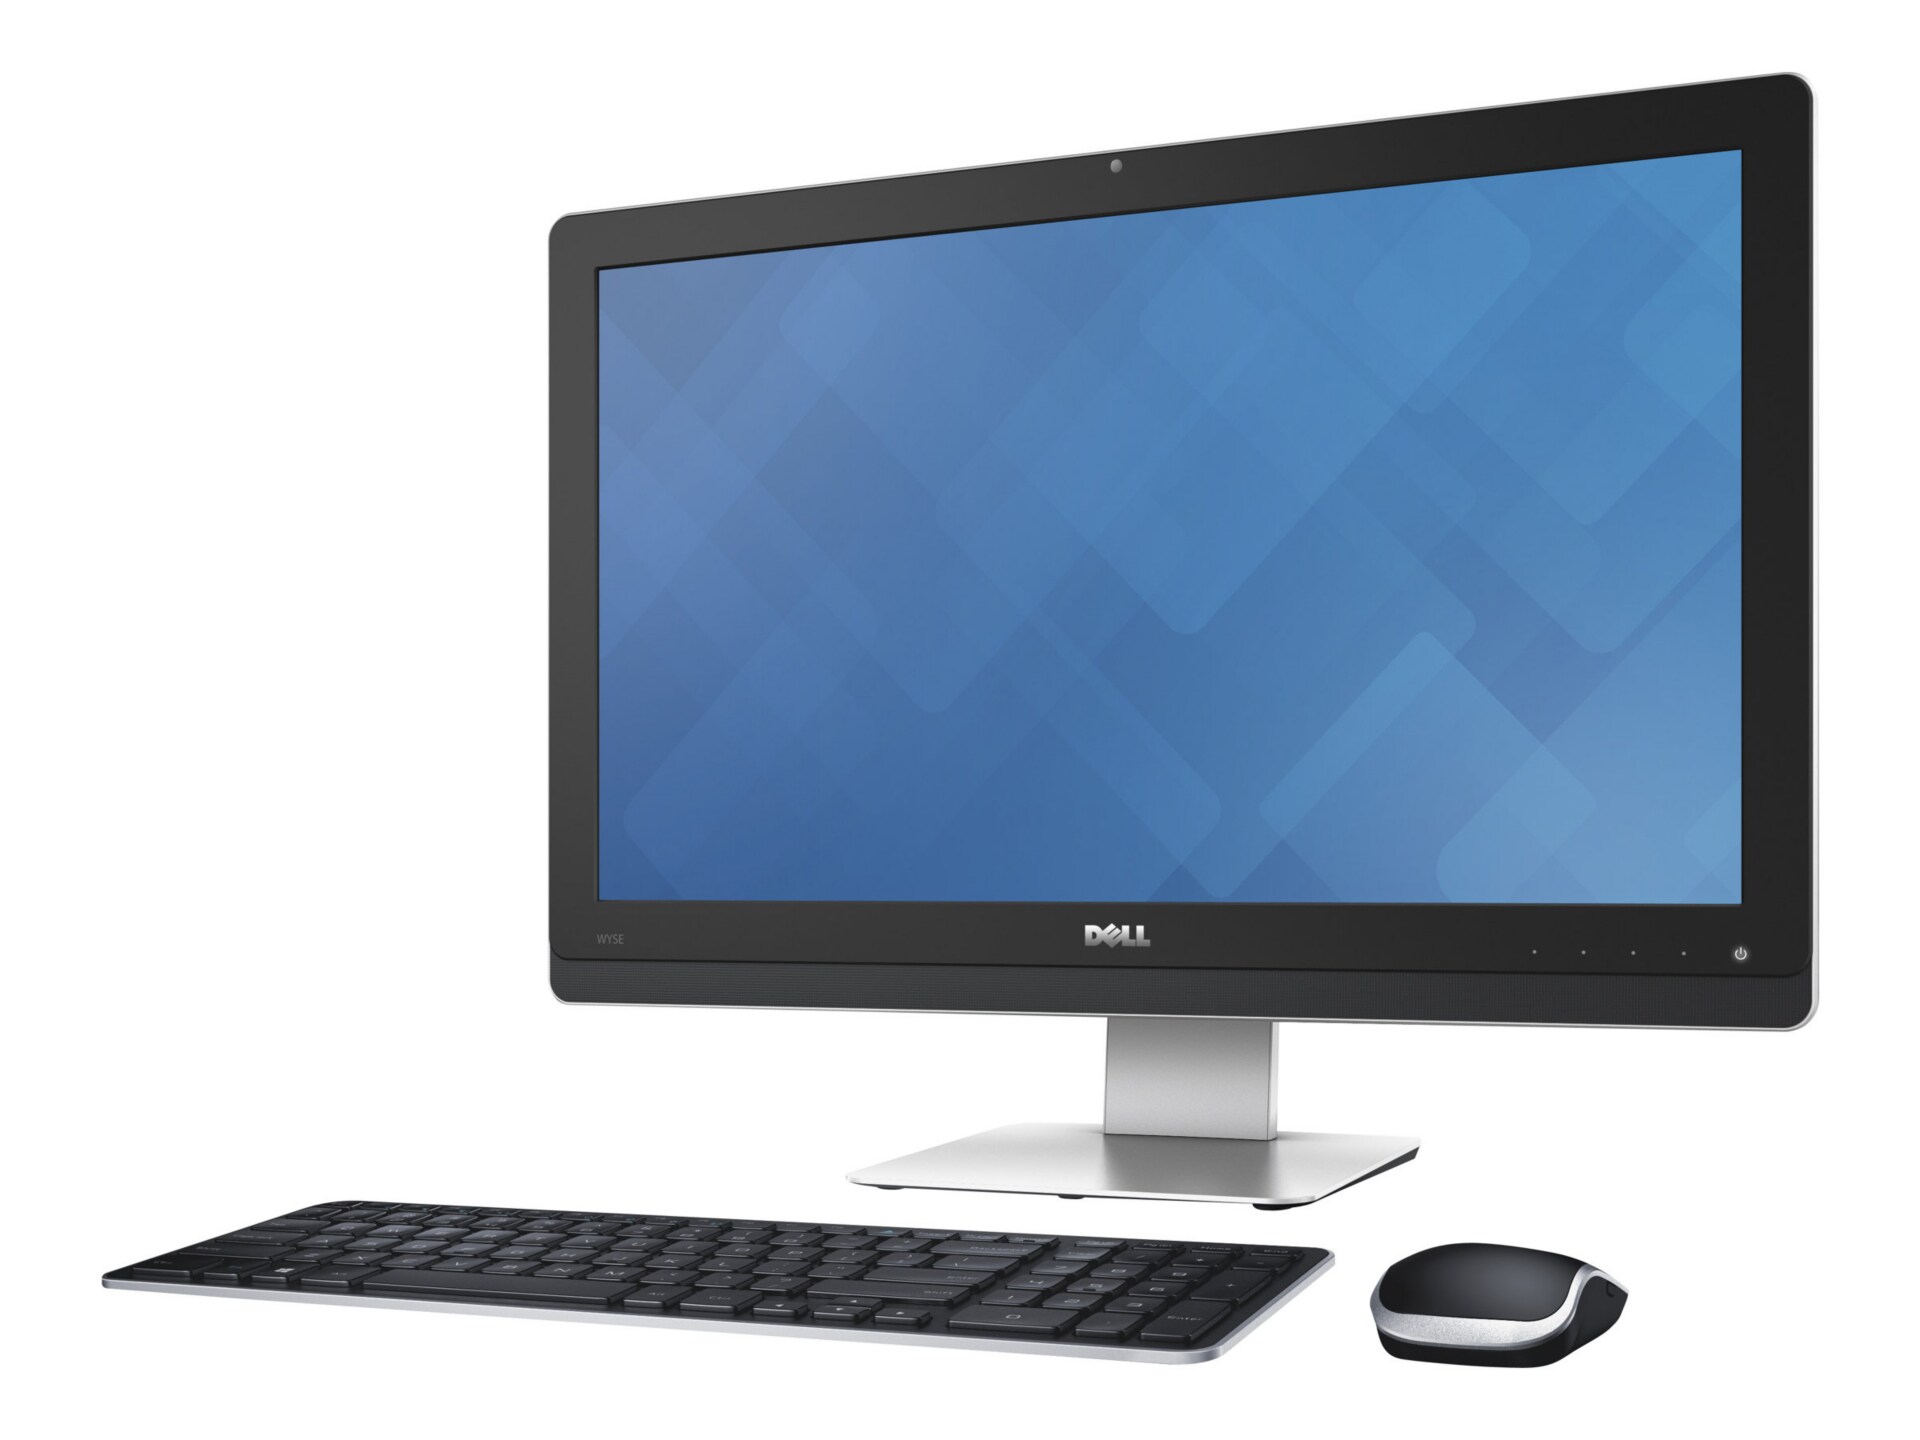 Dell Wyse 5040 - all-in-one - G-T48E 1.4 GHz - 2 GB - 8 GB - LCD 21.5"